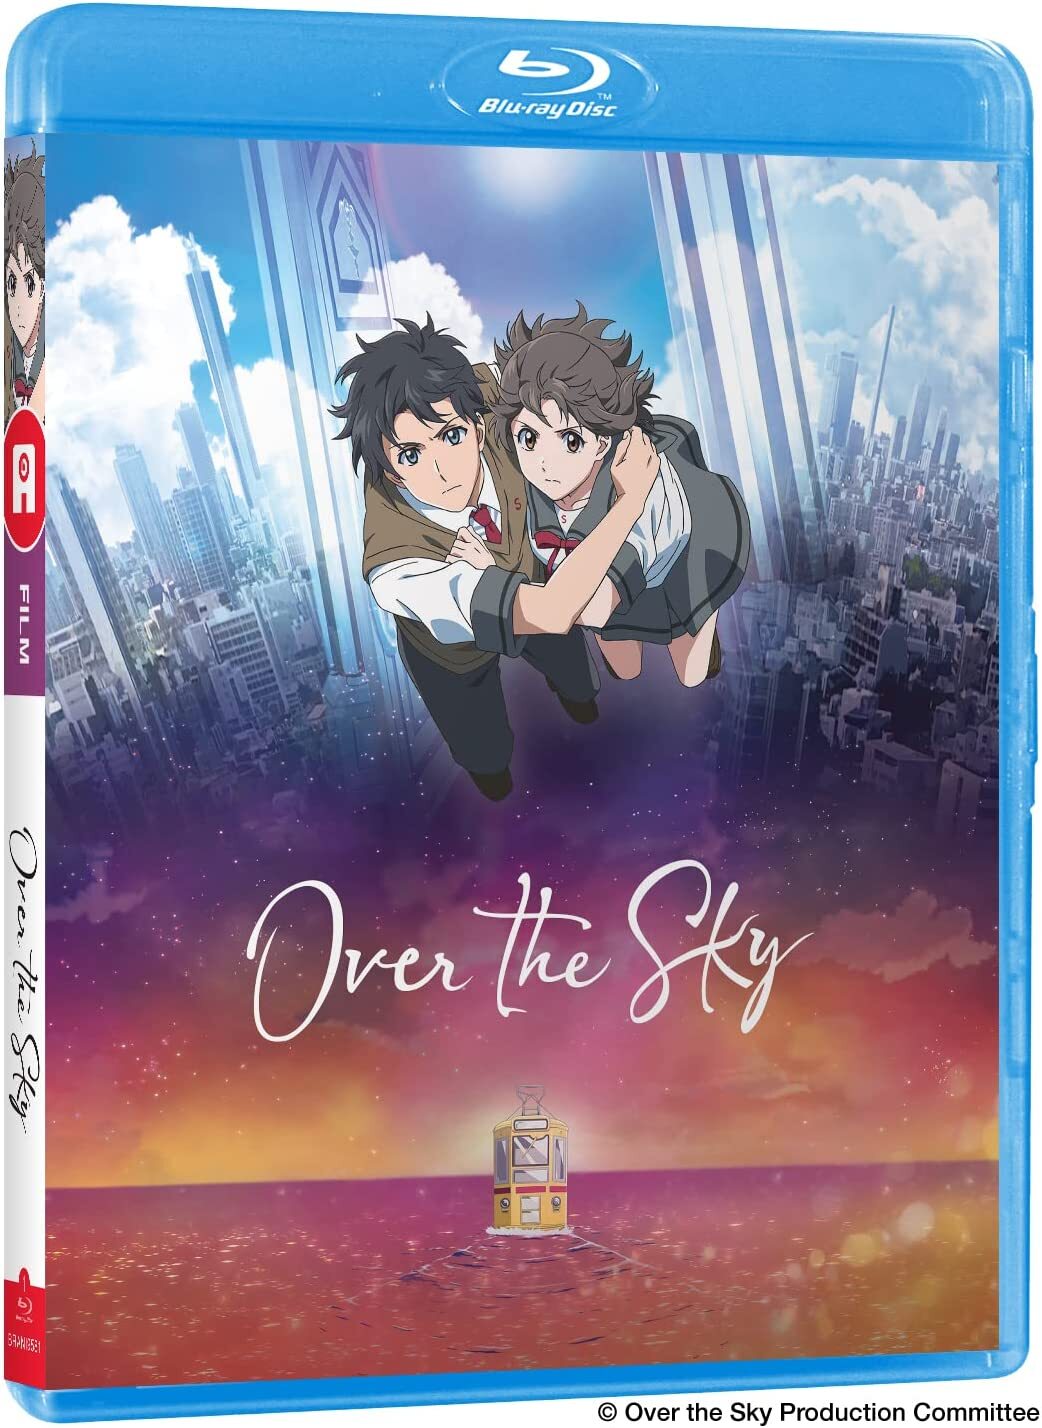 Youll remember A review of Over the Sky